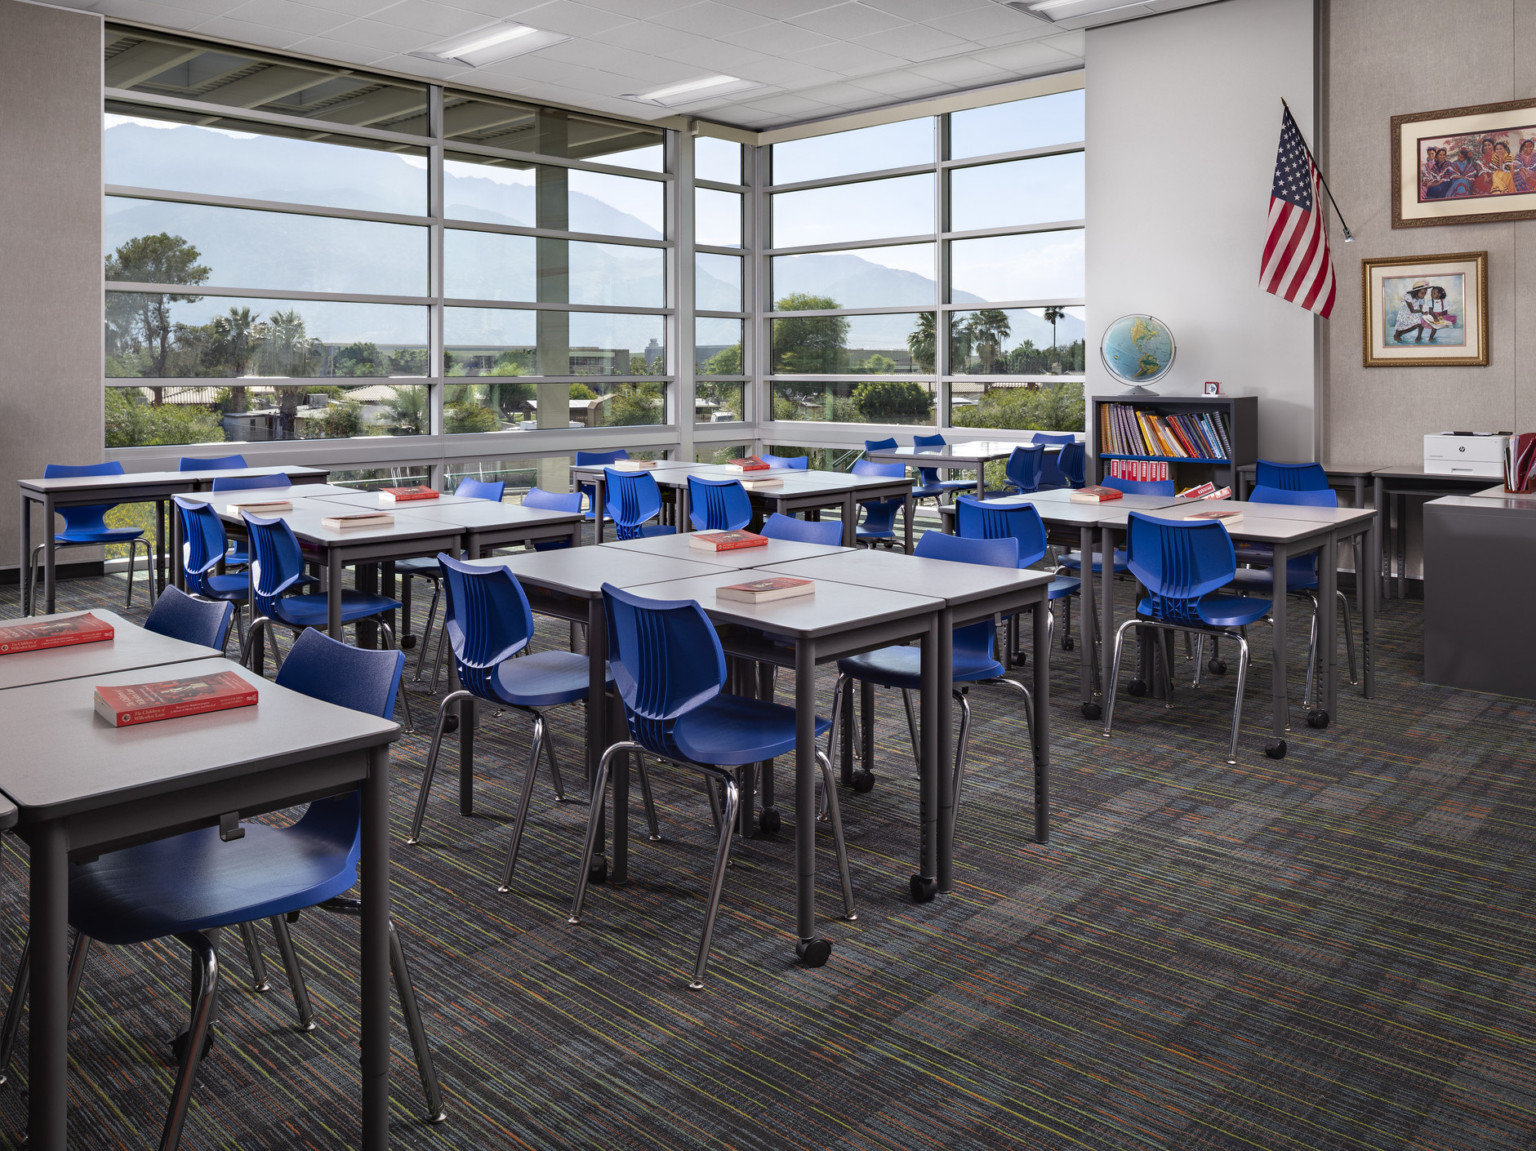 Classroom with flexible desks in quads with blue chairs. Floor to ceiling windows wrap around corner. Art on grey wall